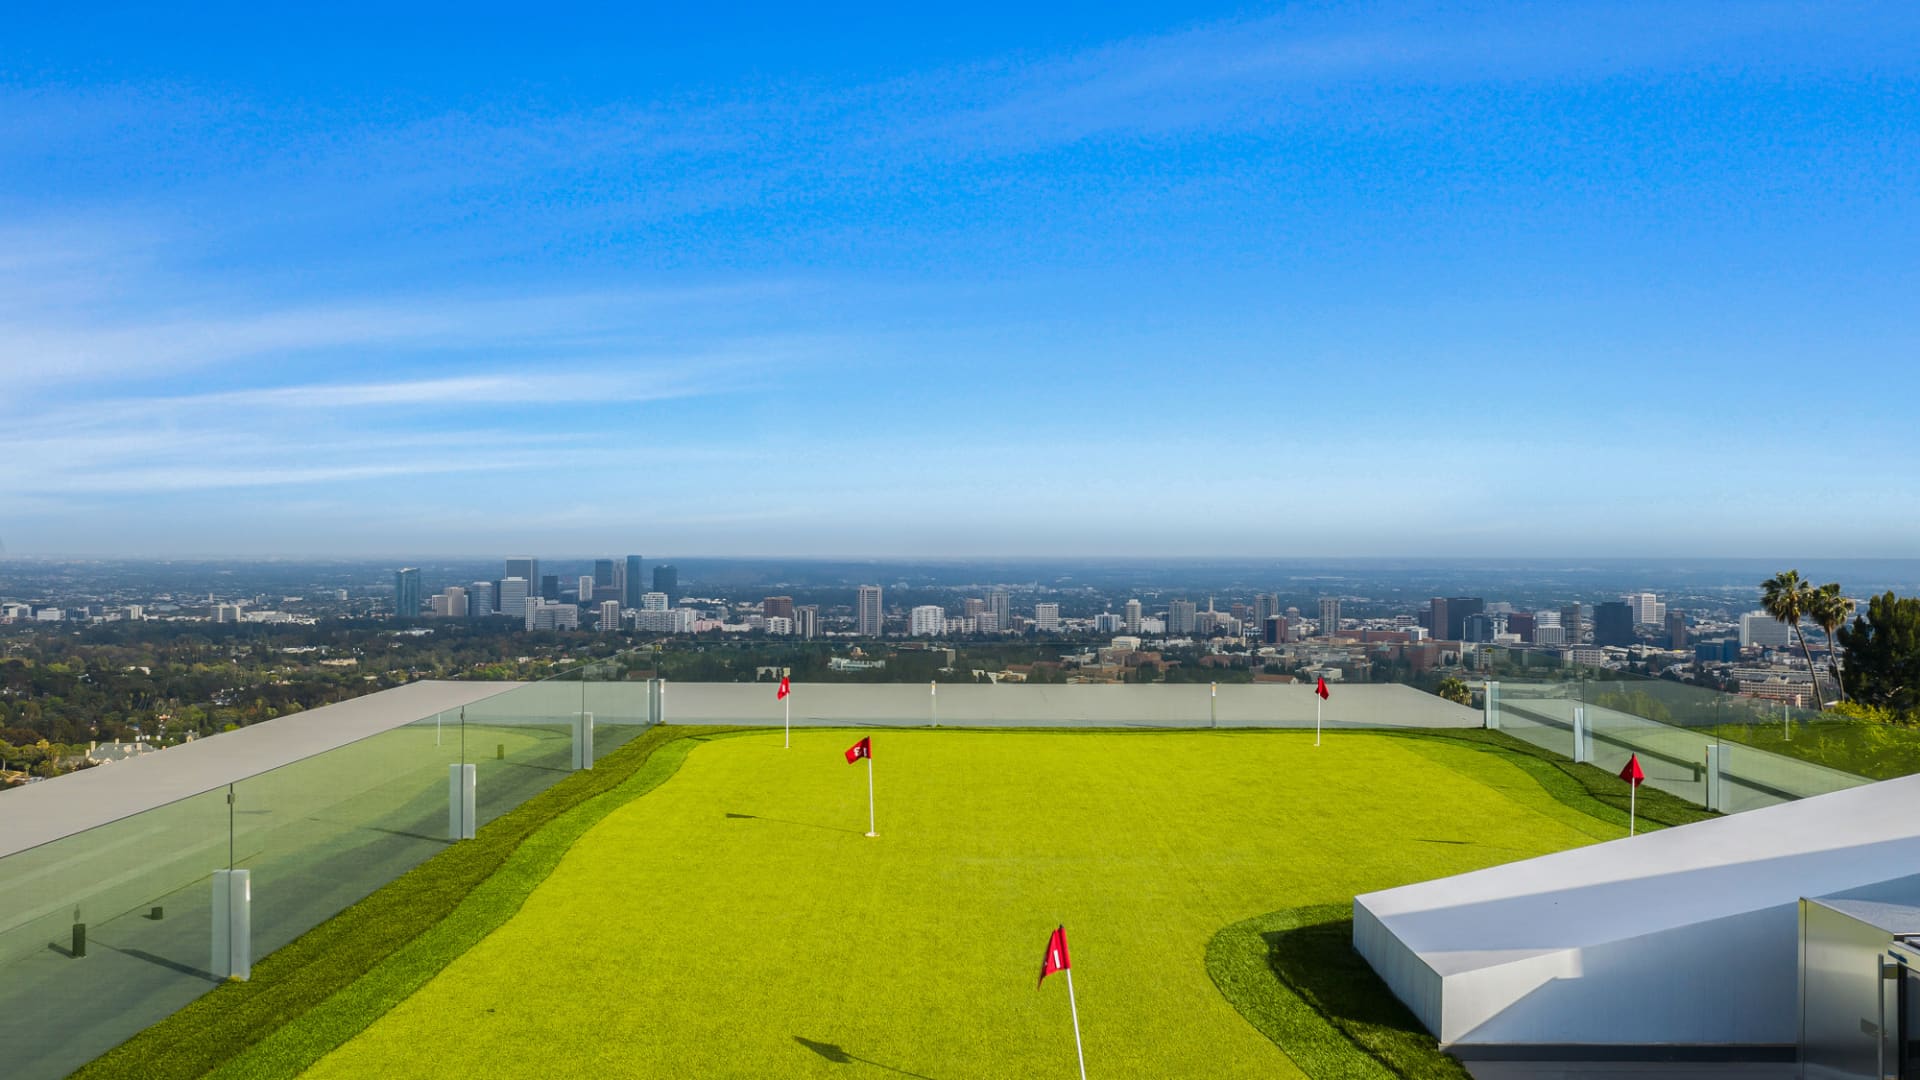 The meaghome's 10,000 sq. ft. roof deck includes a golf green with impressive views of downtown.